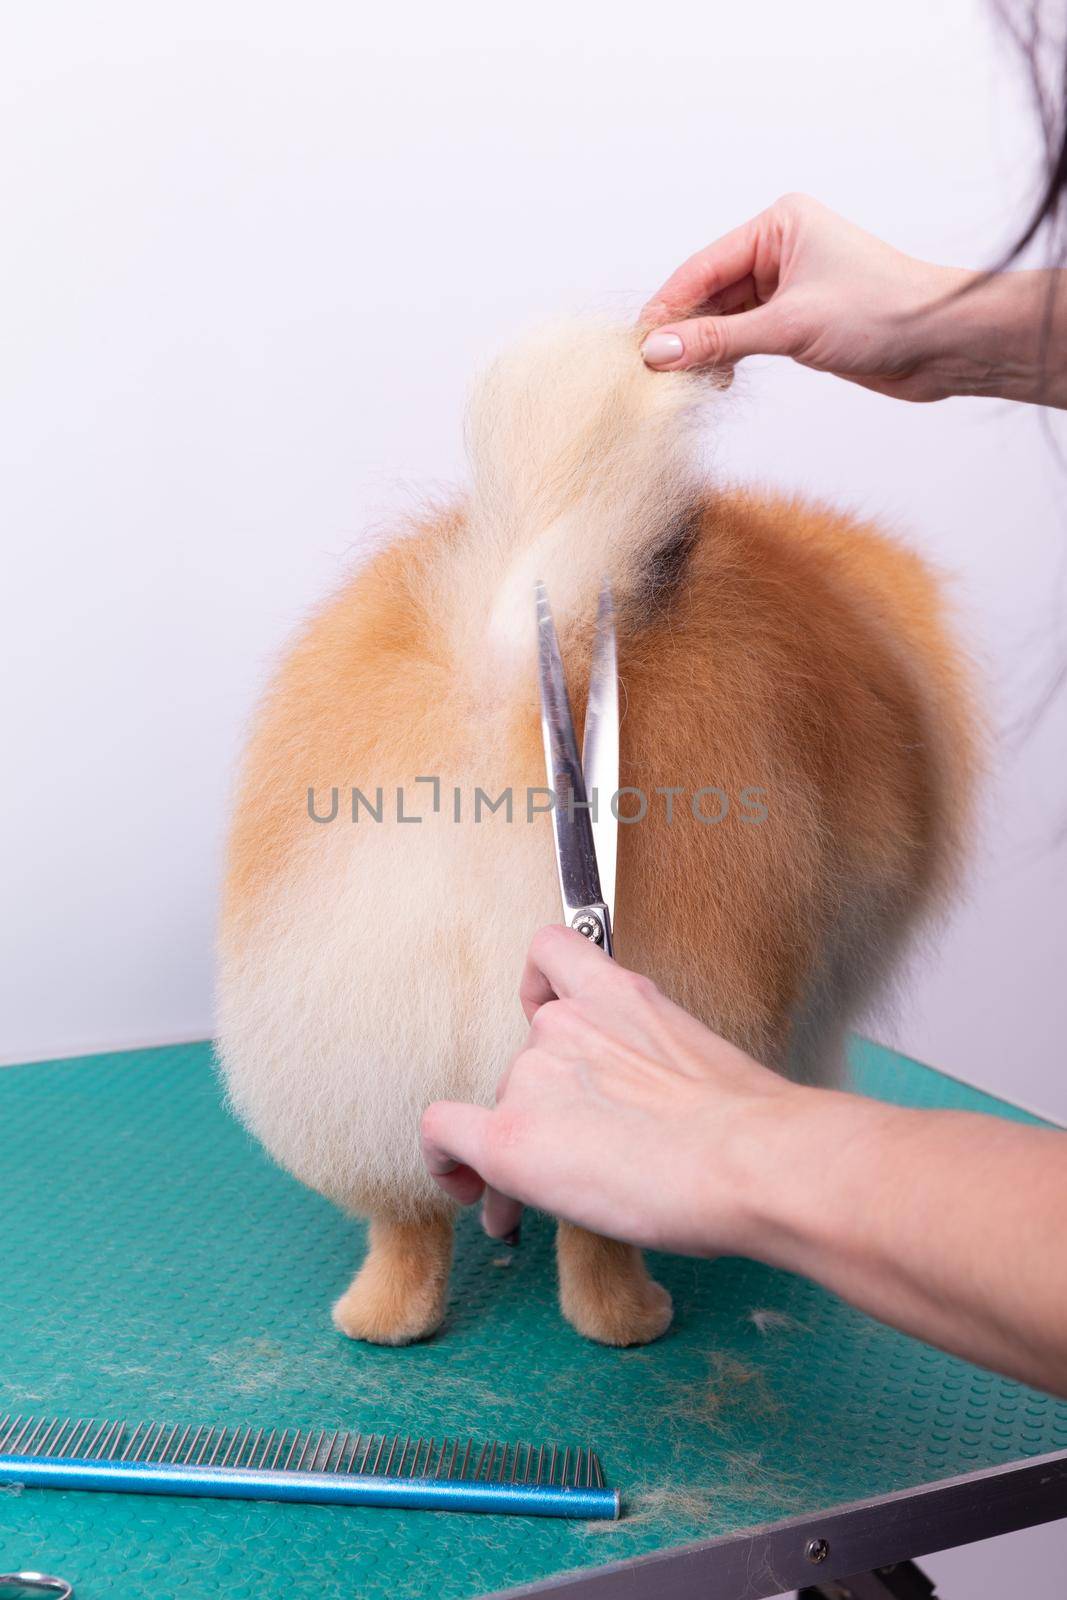 Professional groomer takes care of Orange Pomeranian Spitz in animal beauty salon. Grooming salon worker cuts hair on dog tail in close up. Specialist works with curved scissors.